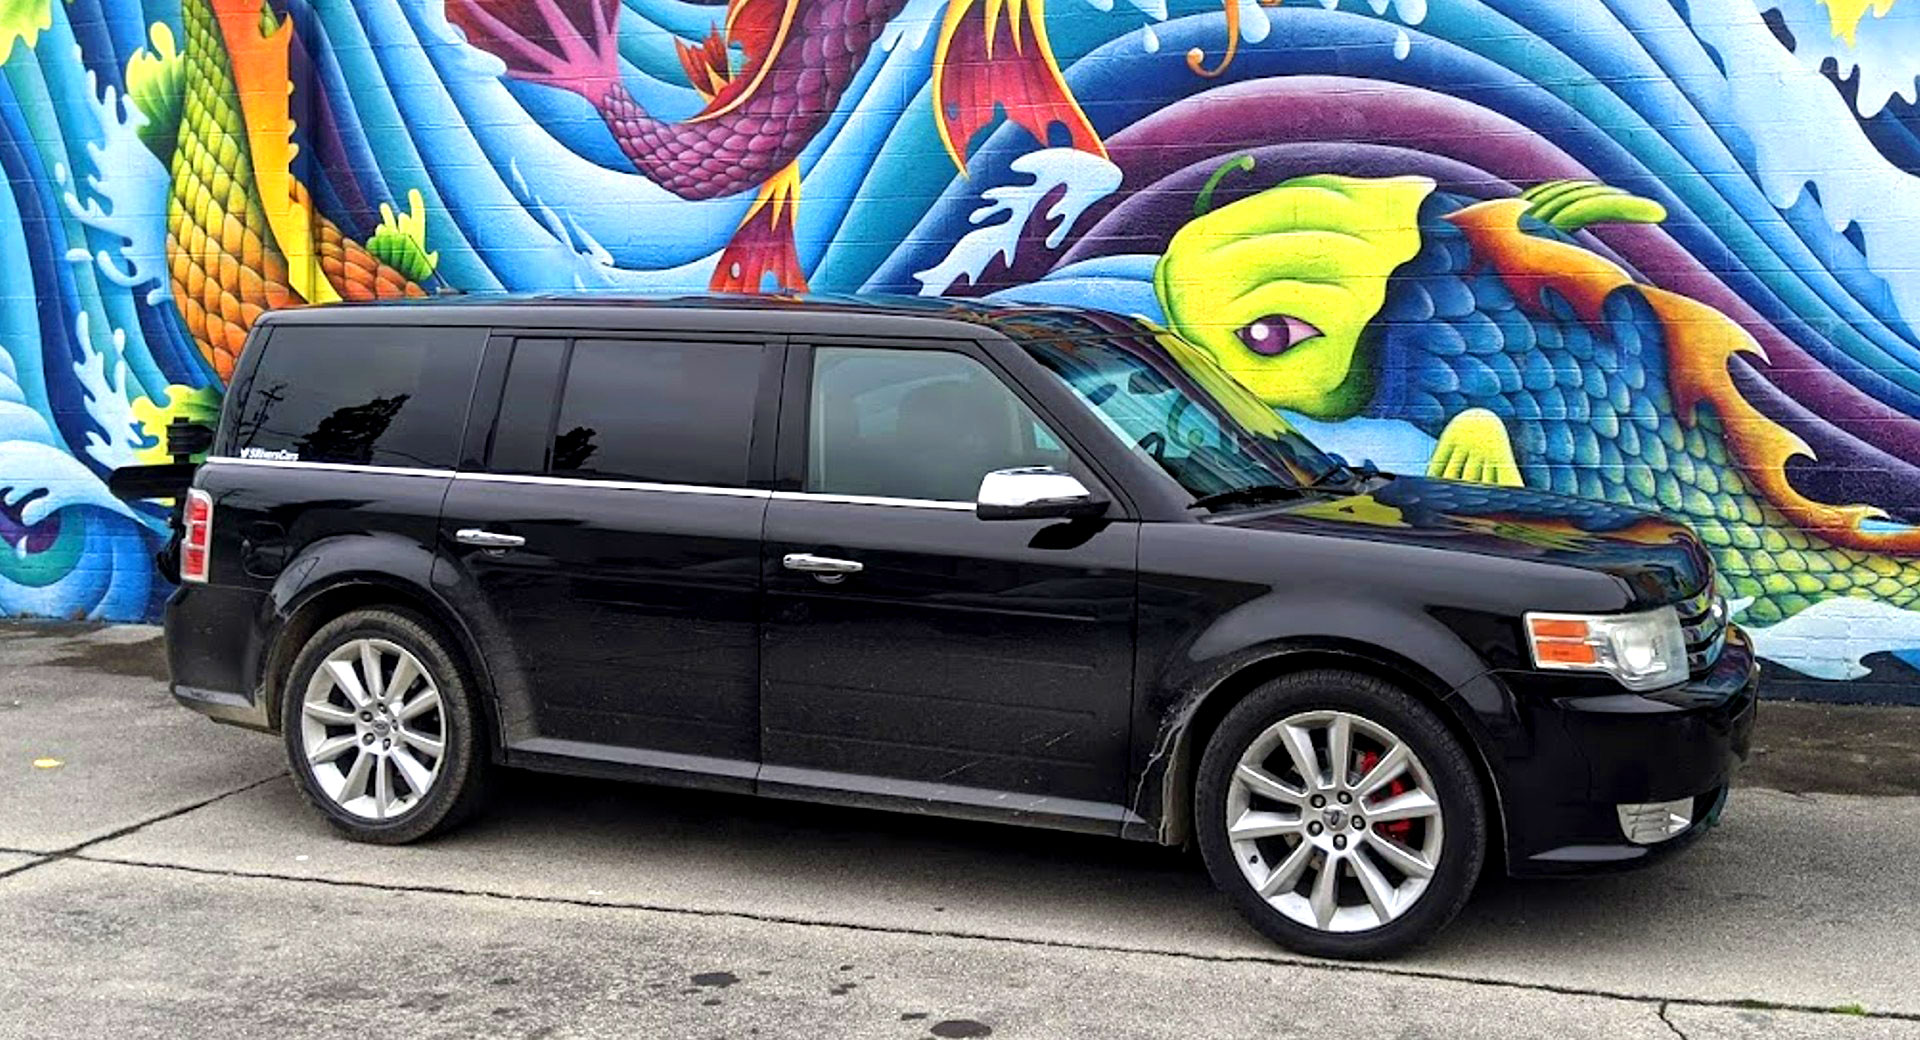 Ford Flex | Carscoops